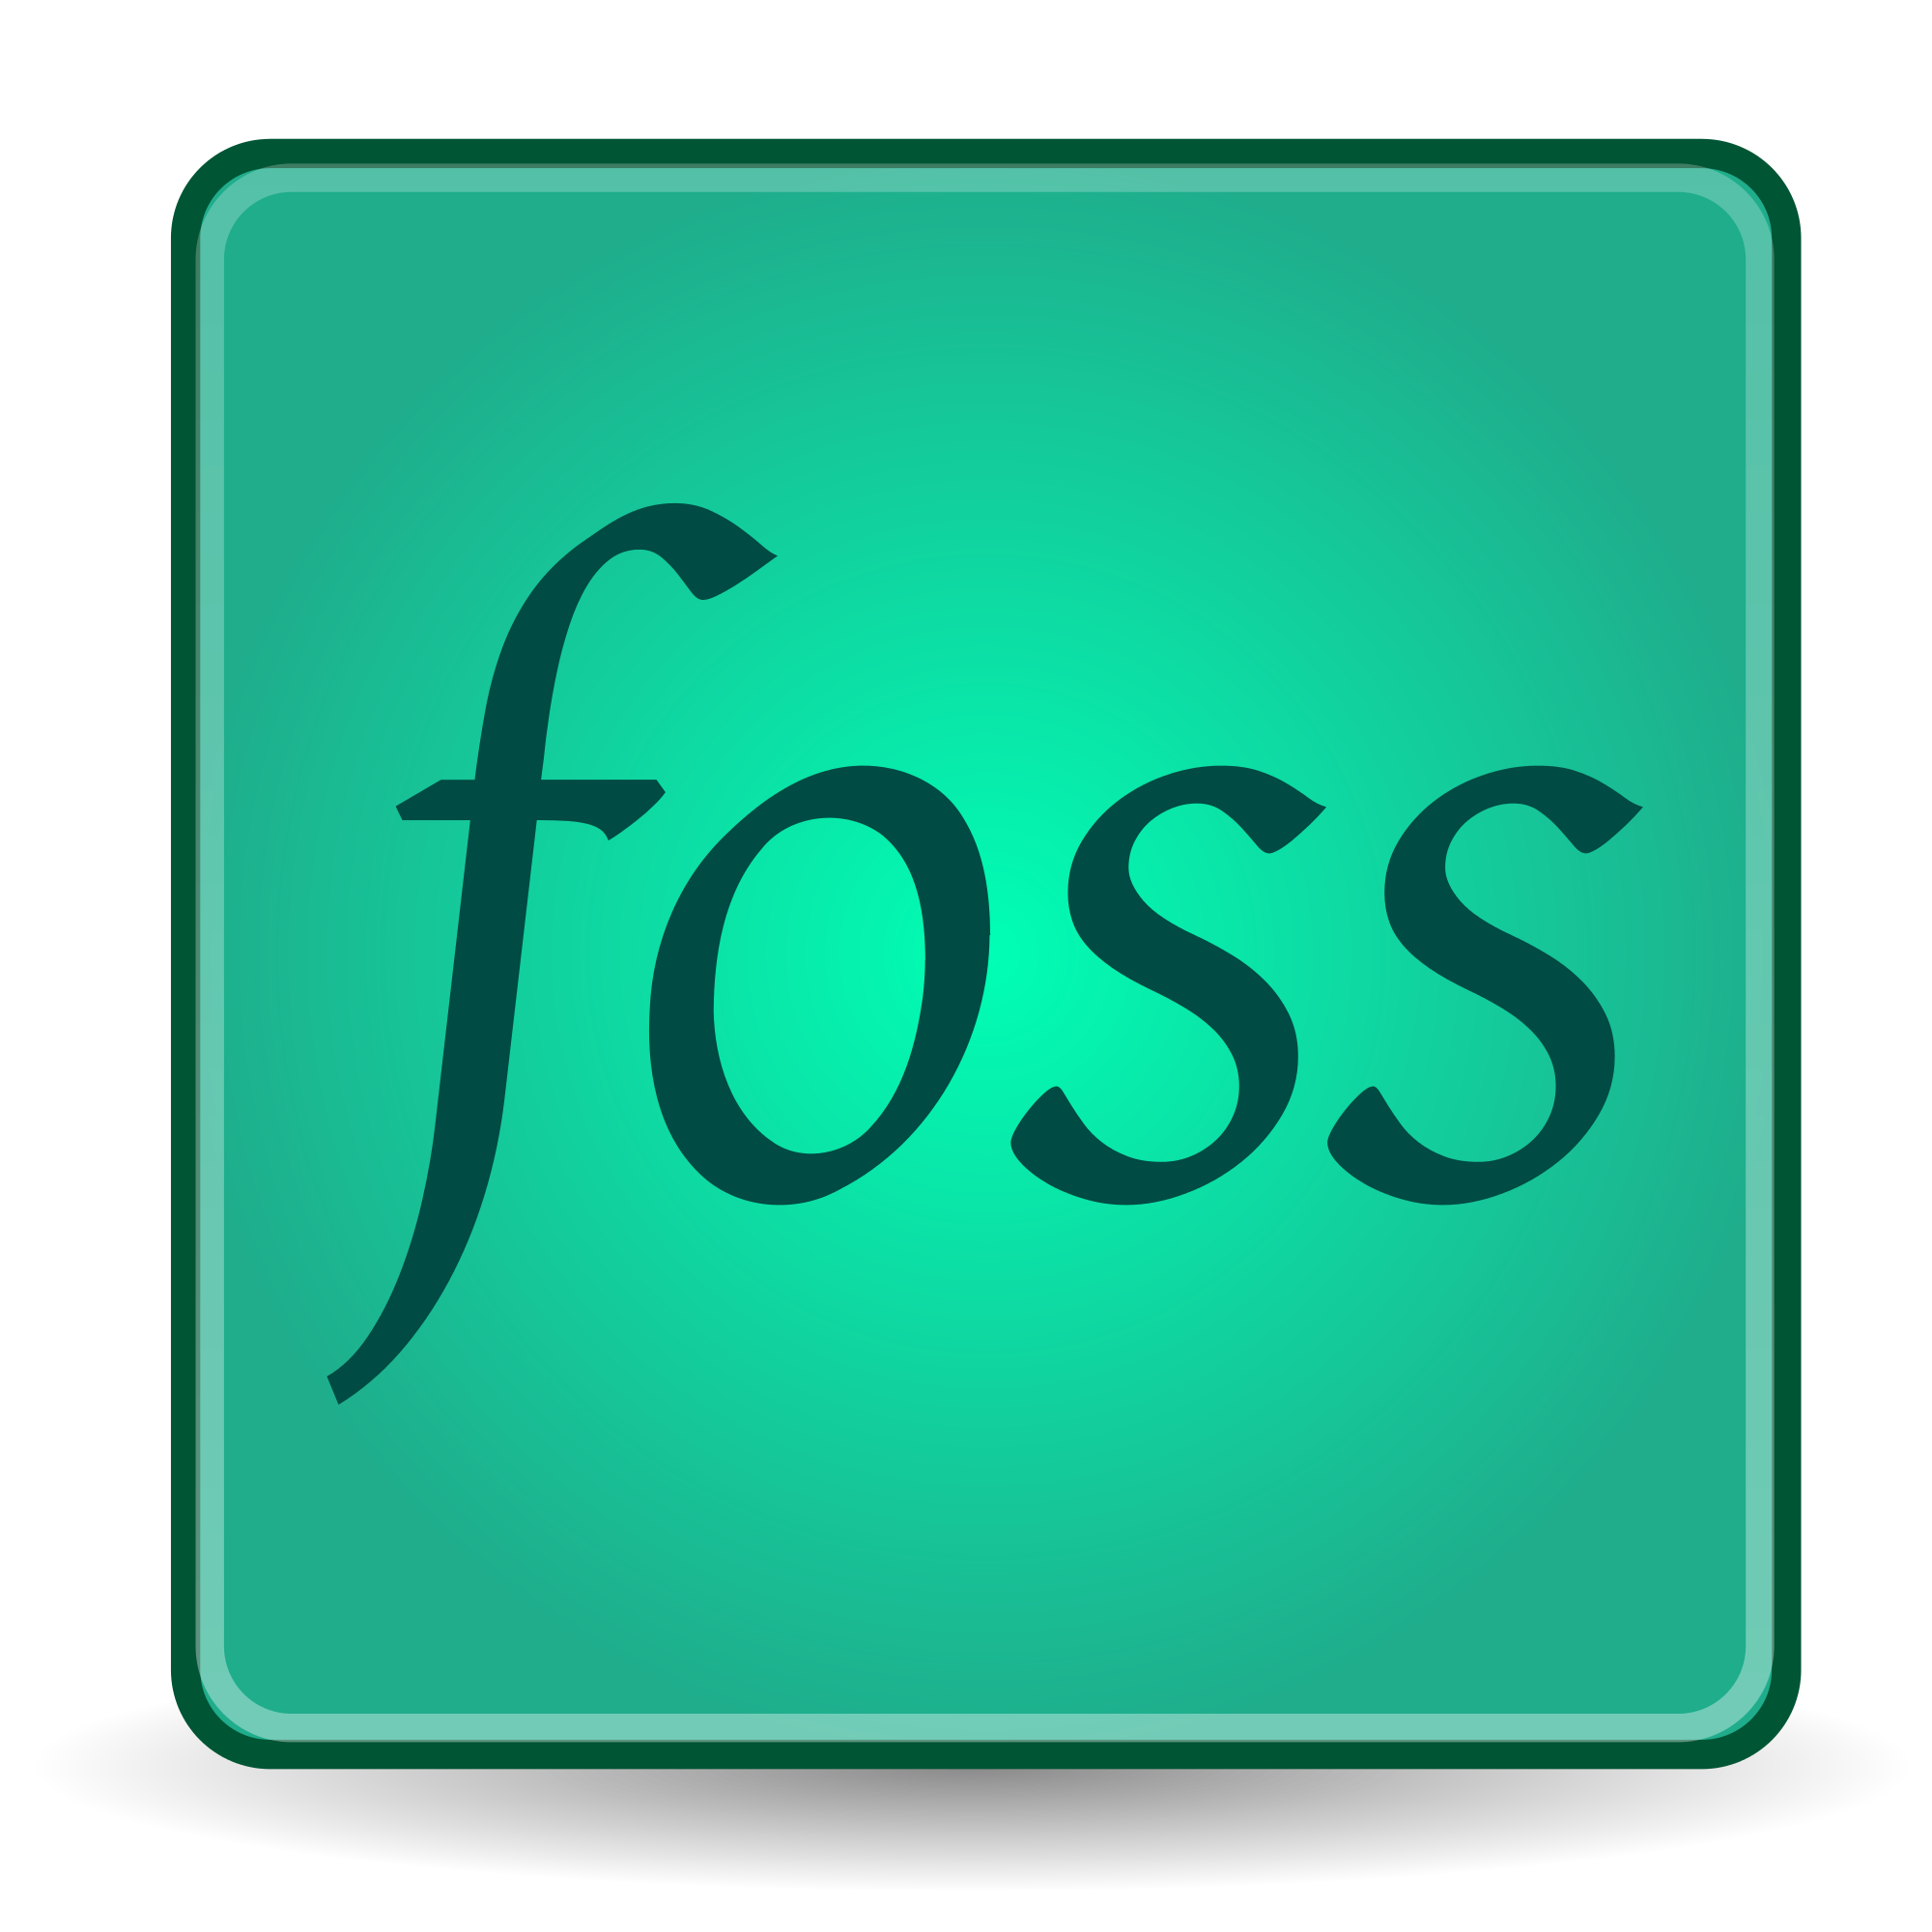 File:Free and open-source software logo (2009).svg